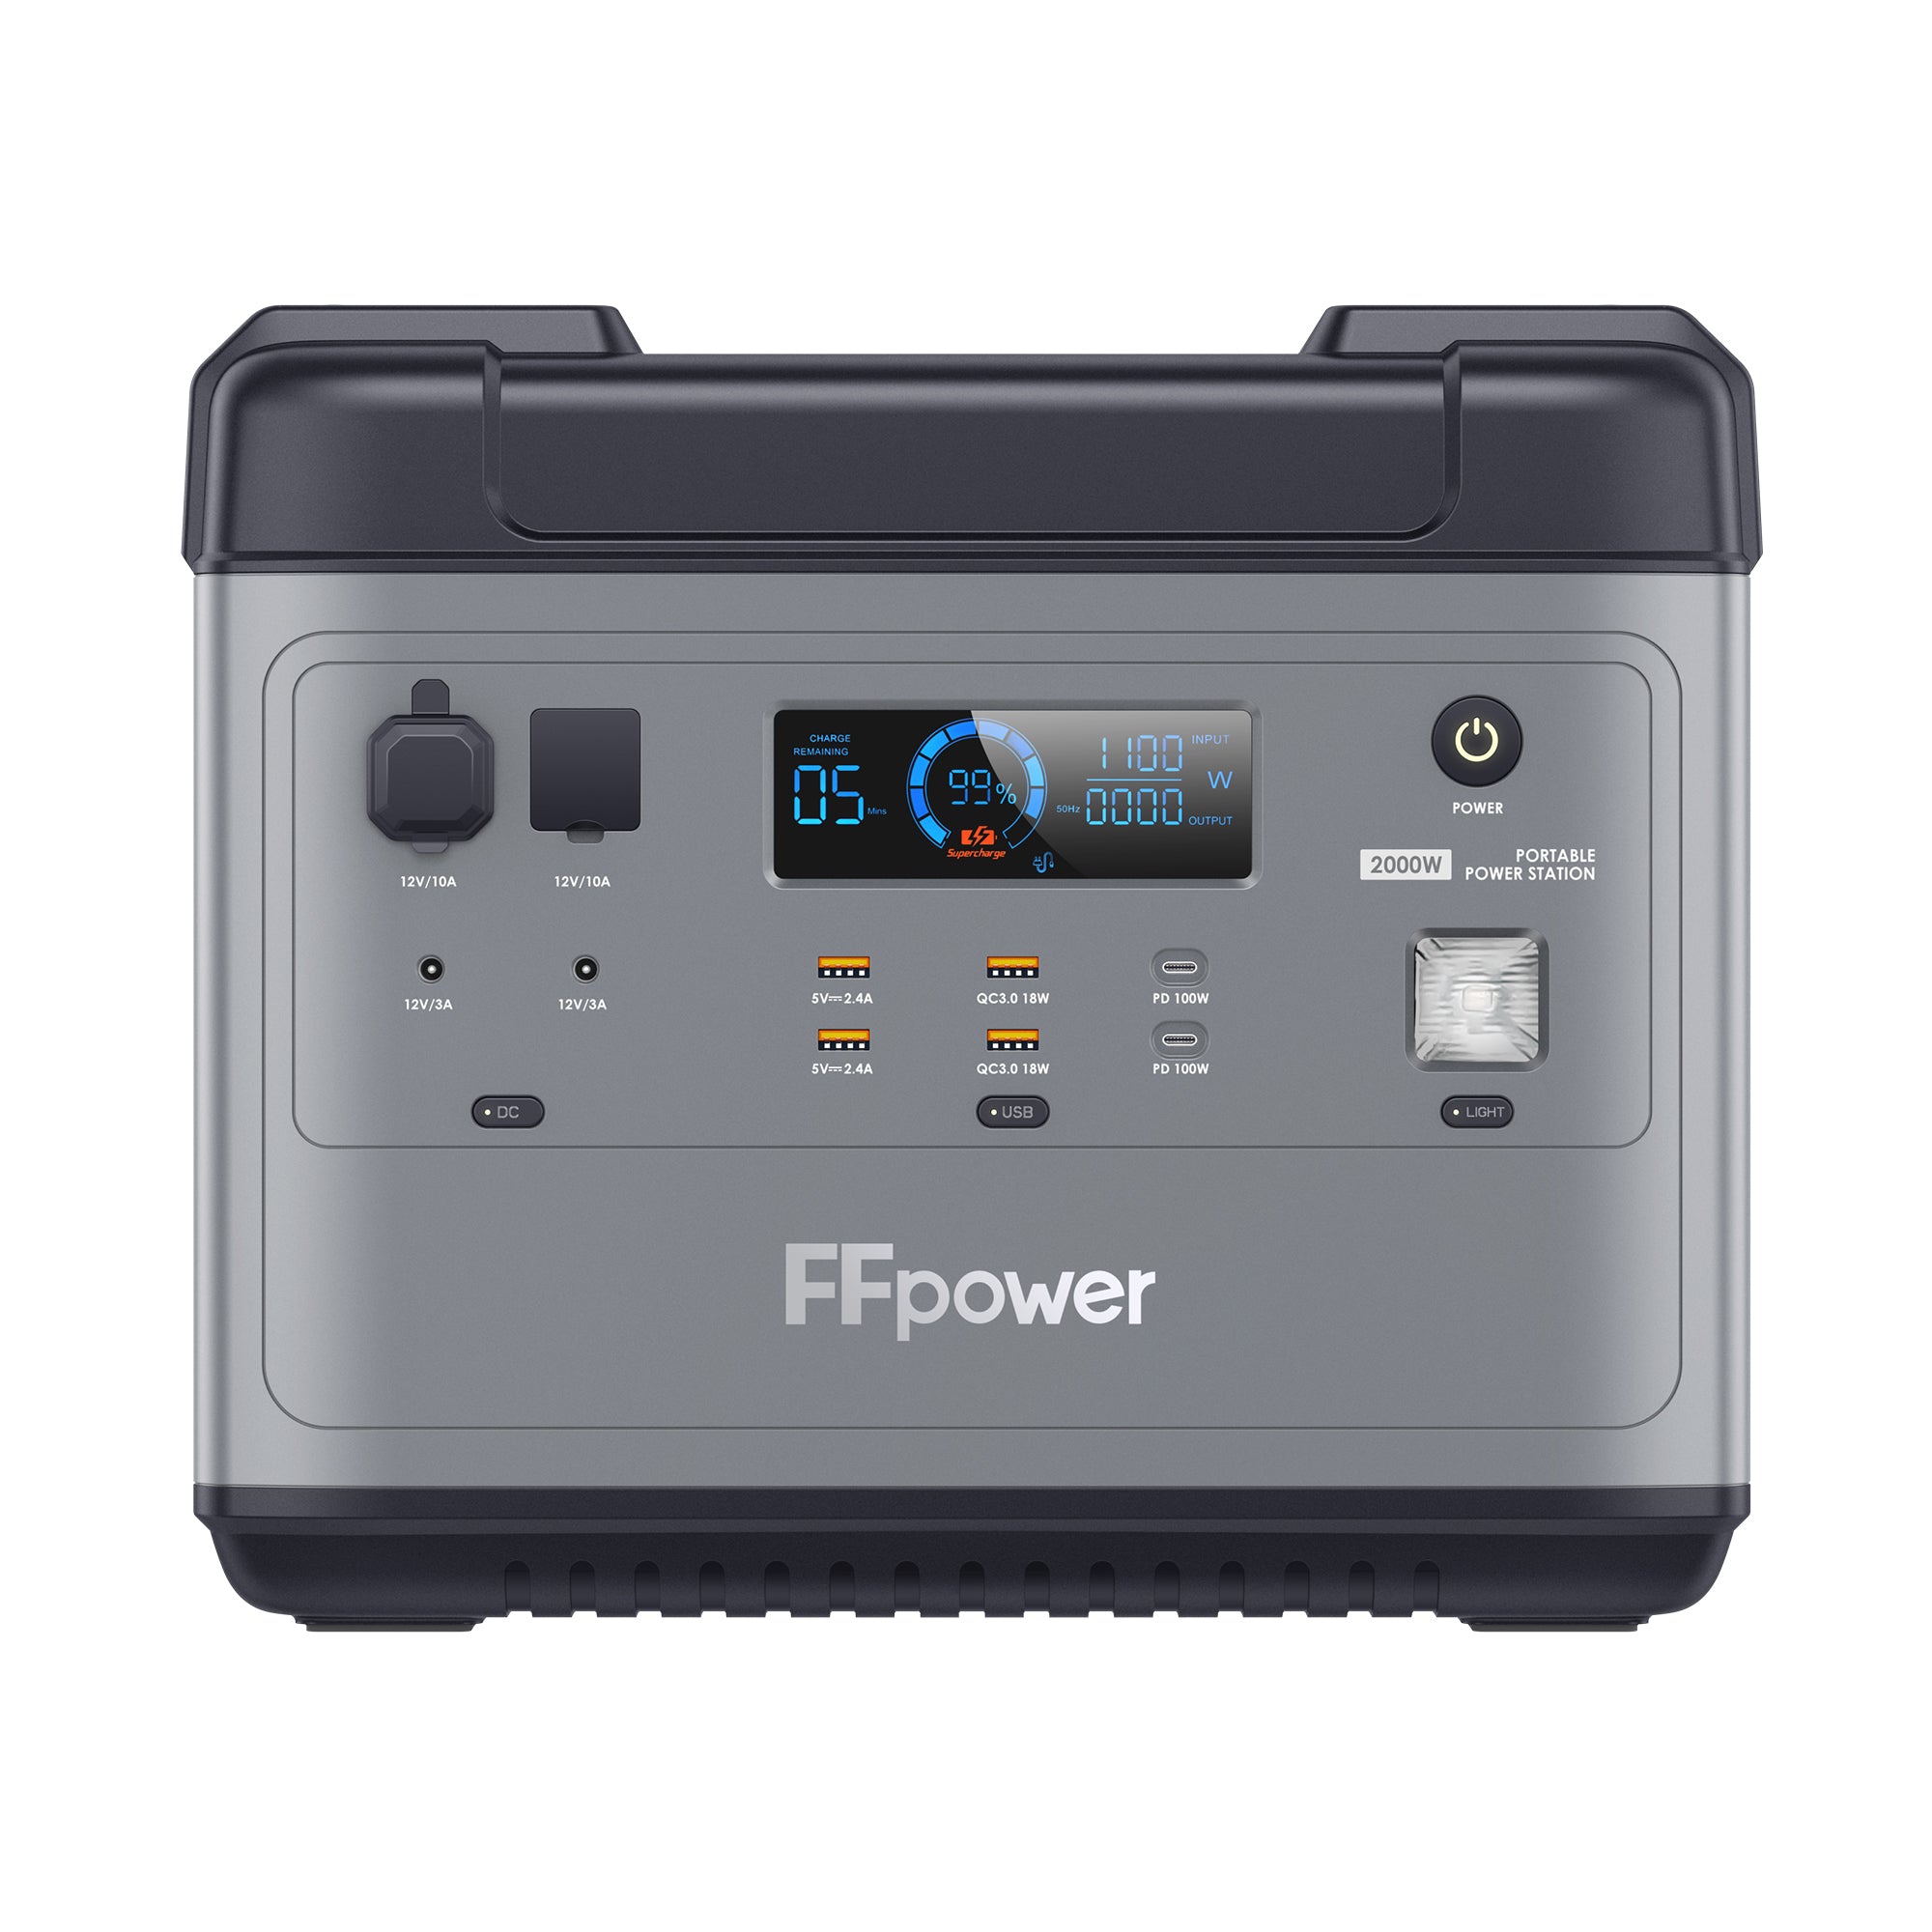 FFpower P2001 Portable Power Station 2000Wh